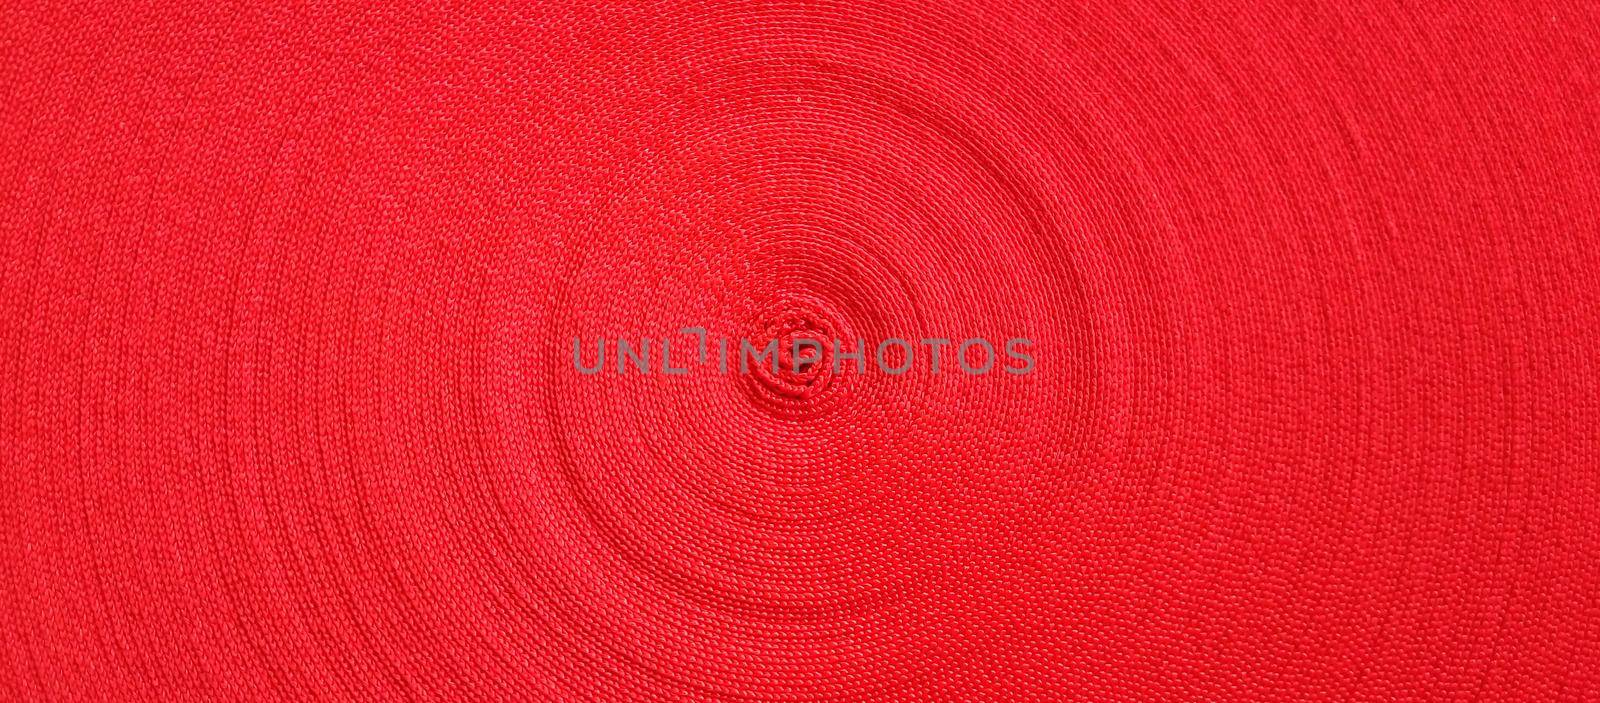 Red abstract circular pattern made of red sling by lapushka62